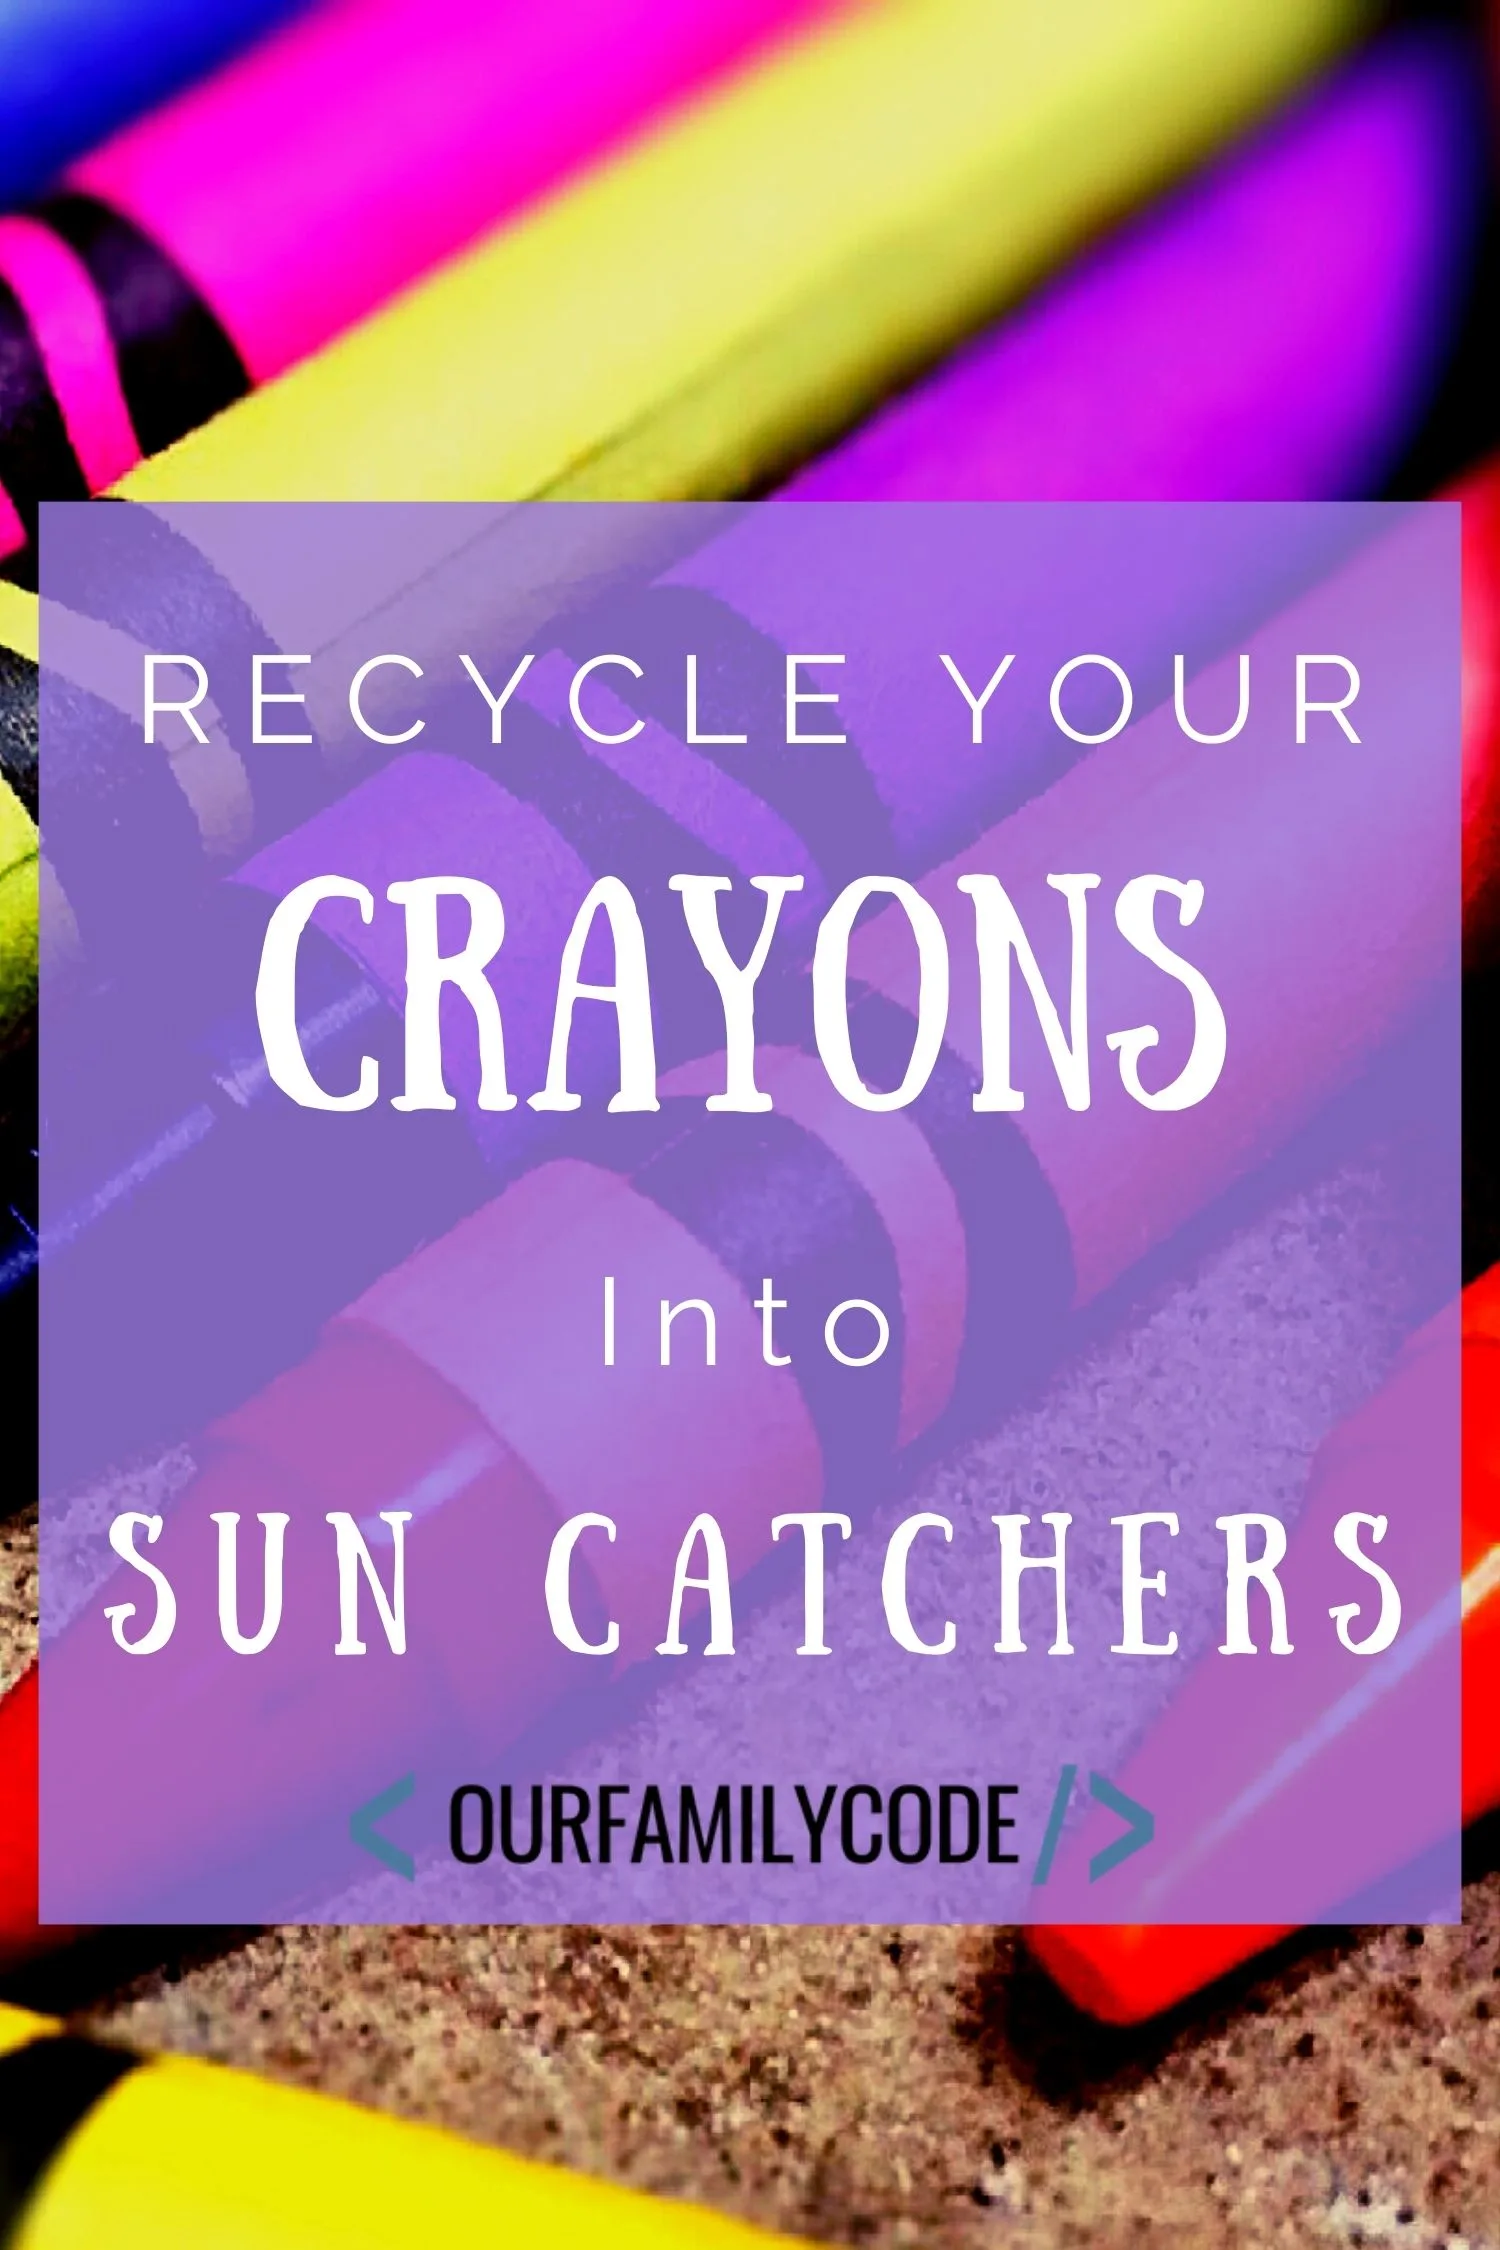 A picture of crayons with purple overlay and blog title text "Recycle your crayons into suncatchers" written in white font.